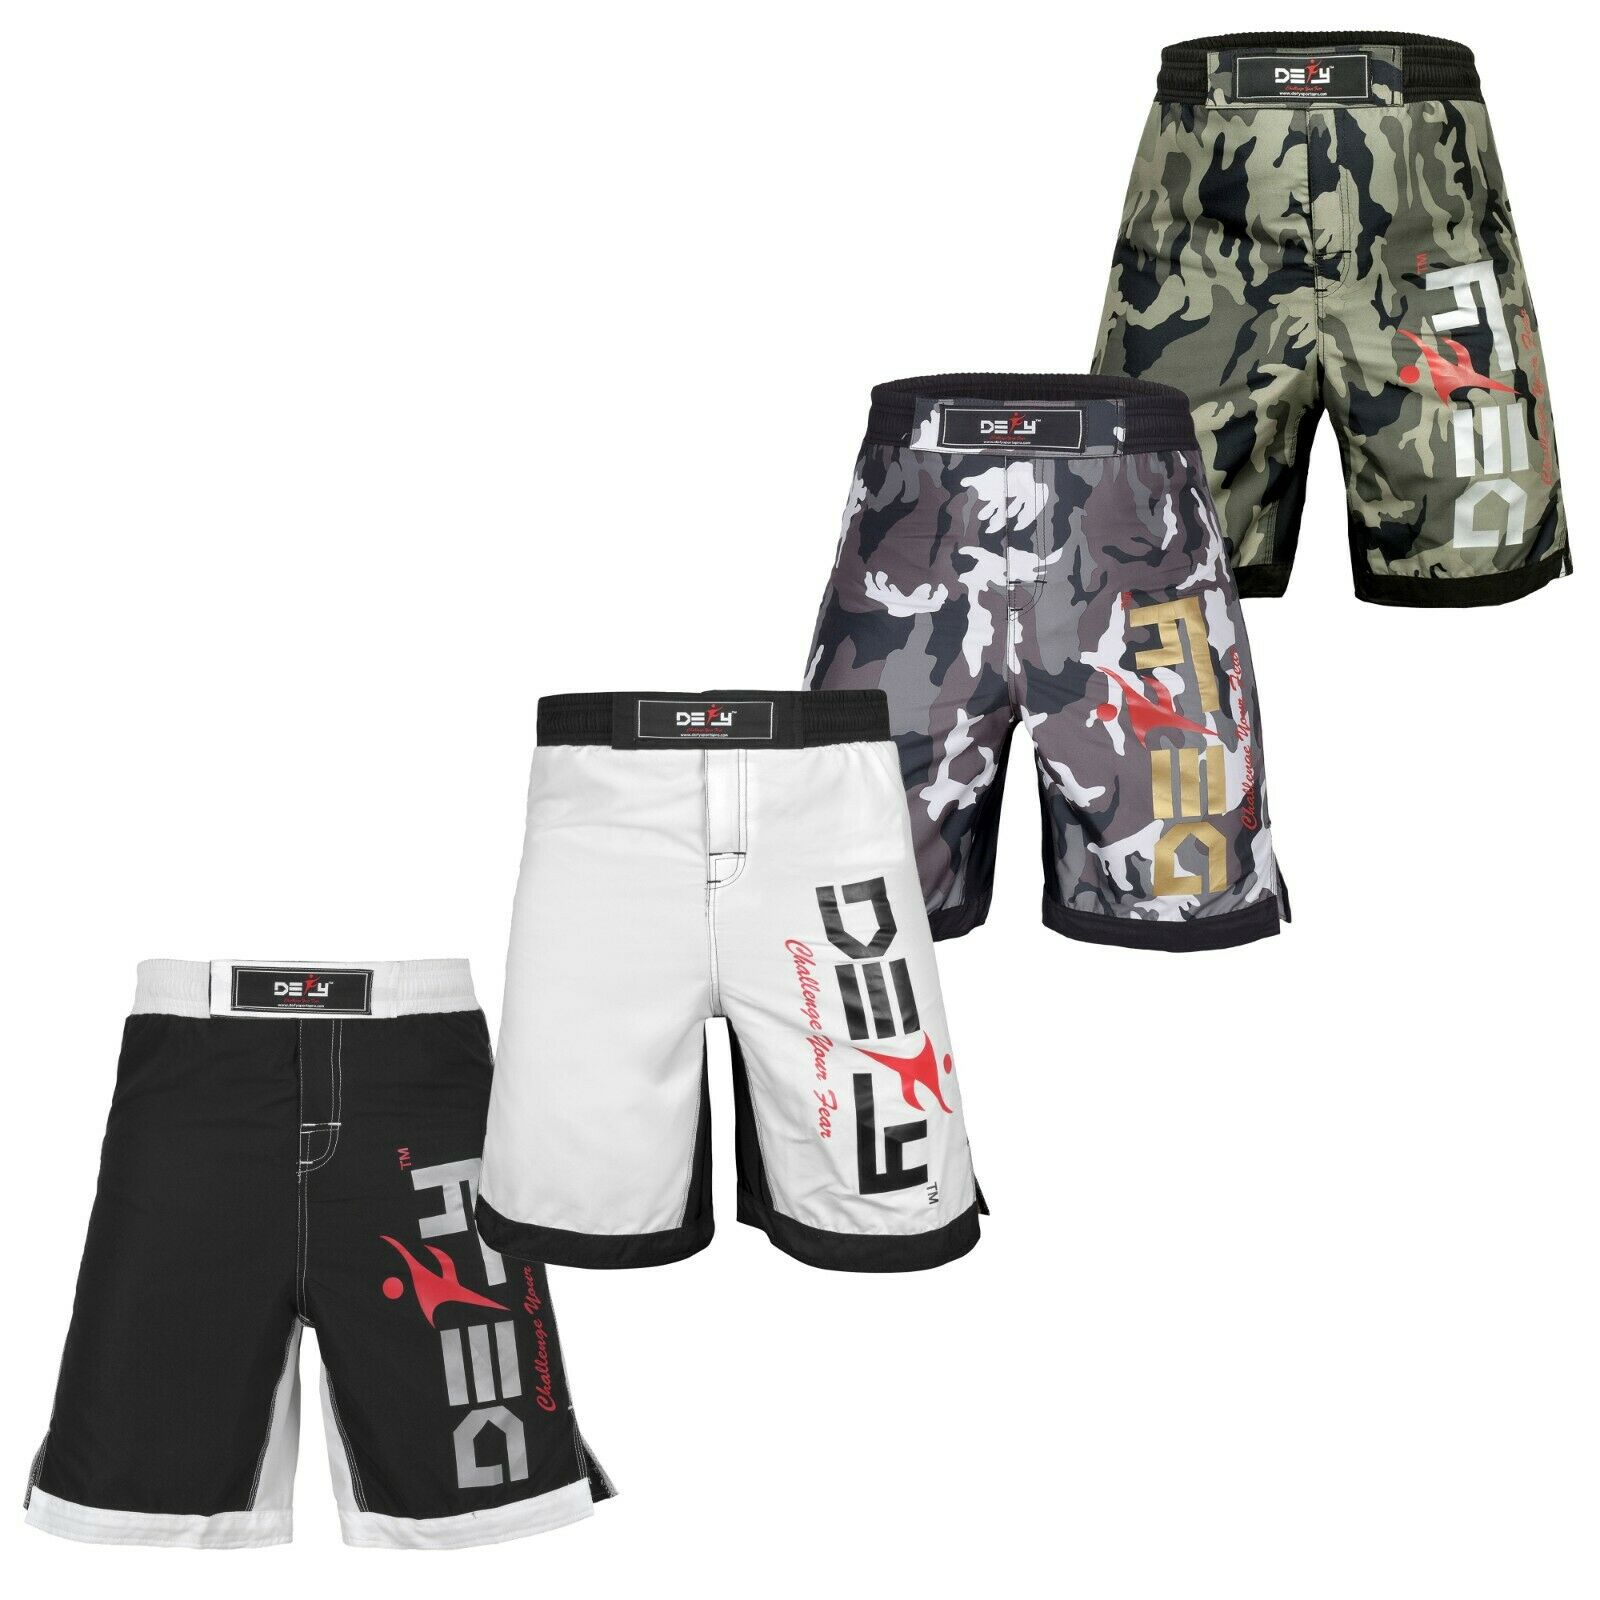 Defy New Mma Boxing X-treme Shorts Gym Muay Thai Ufc Cage Fight Bjj Grappling